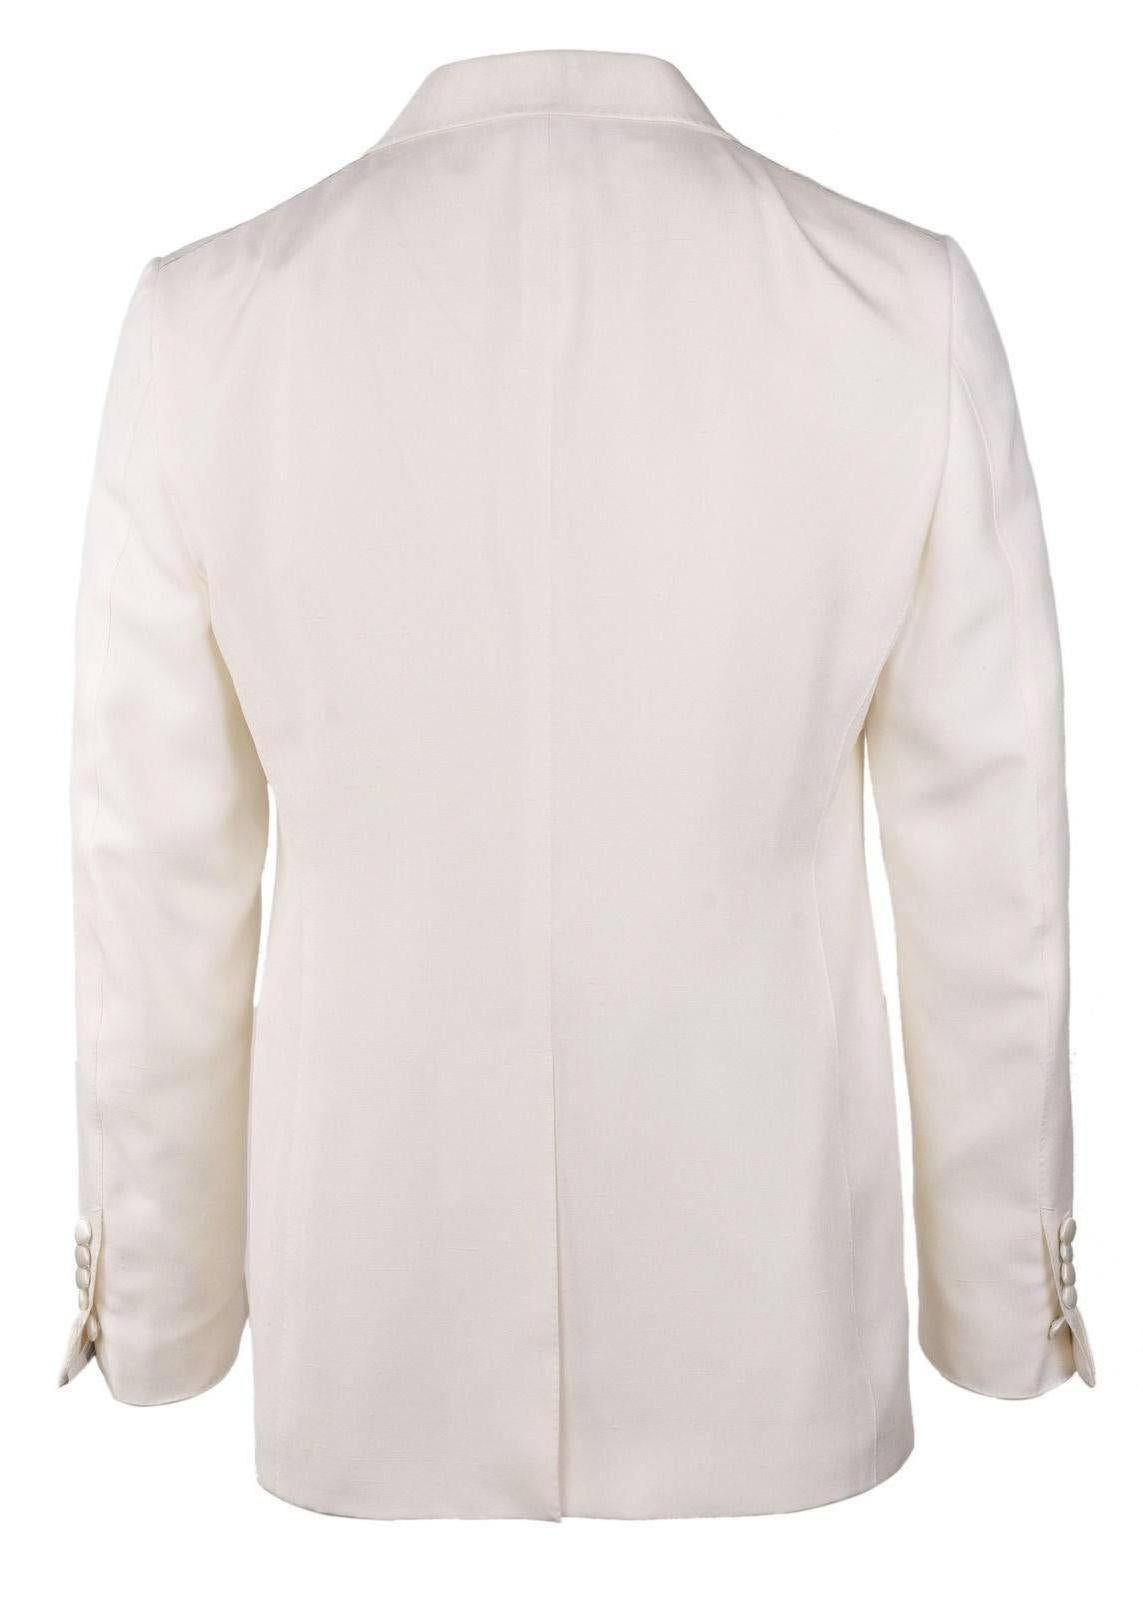 Set the tone for the day in your Tom Ford Shelton jacket. This cocktail piece features a satin shawl lapel, single button closure, and 100 percent silk construction. You can pair this cocktail jacket with dark streamlined slacks and polished leather